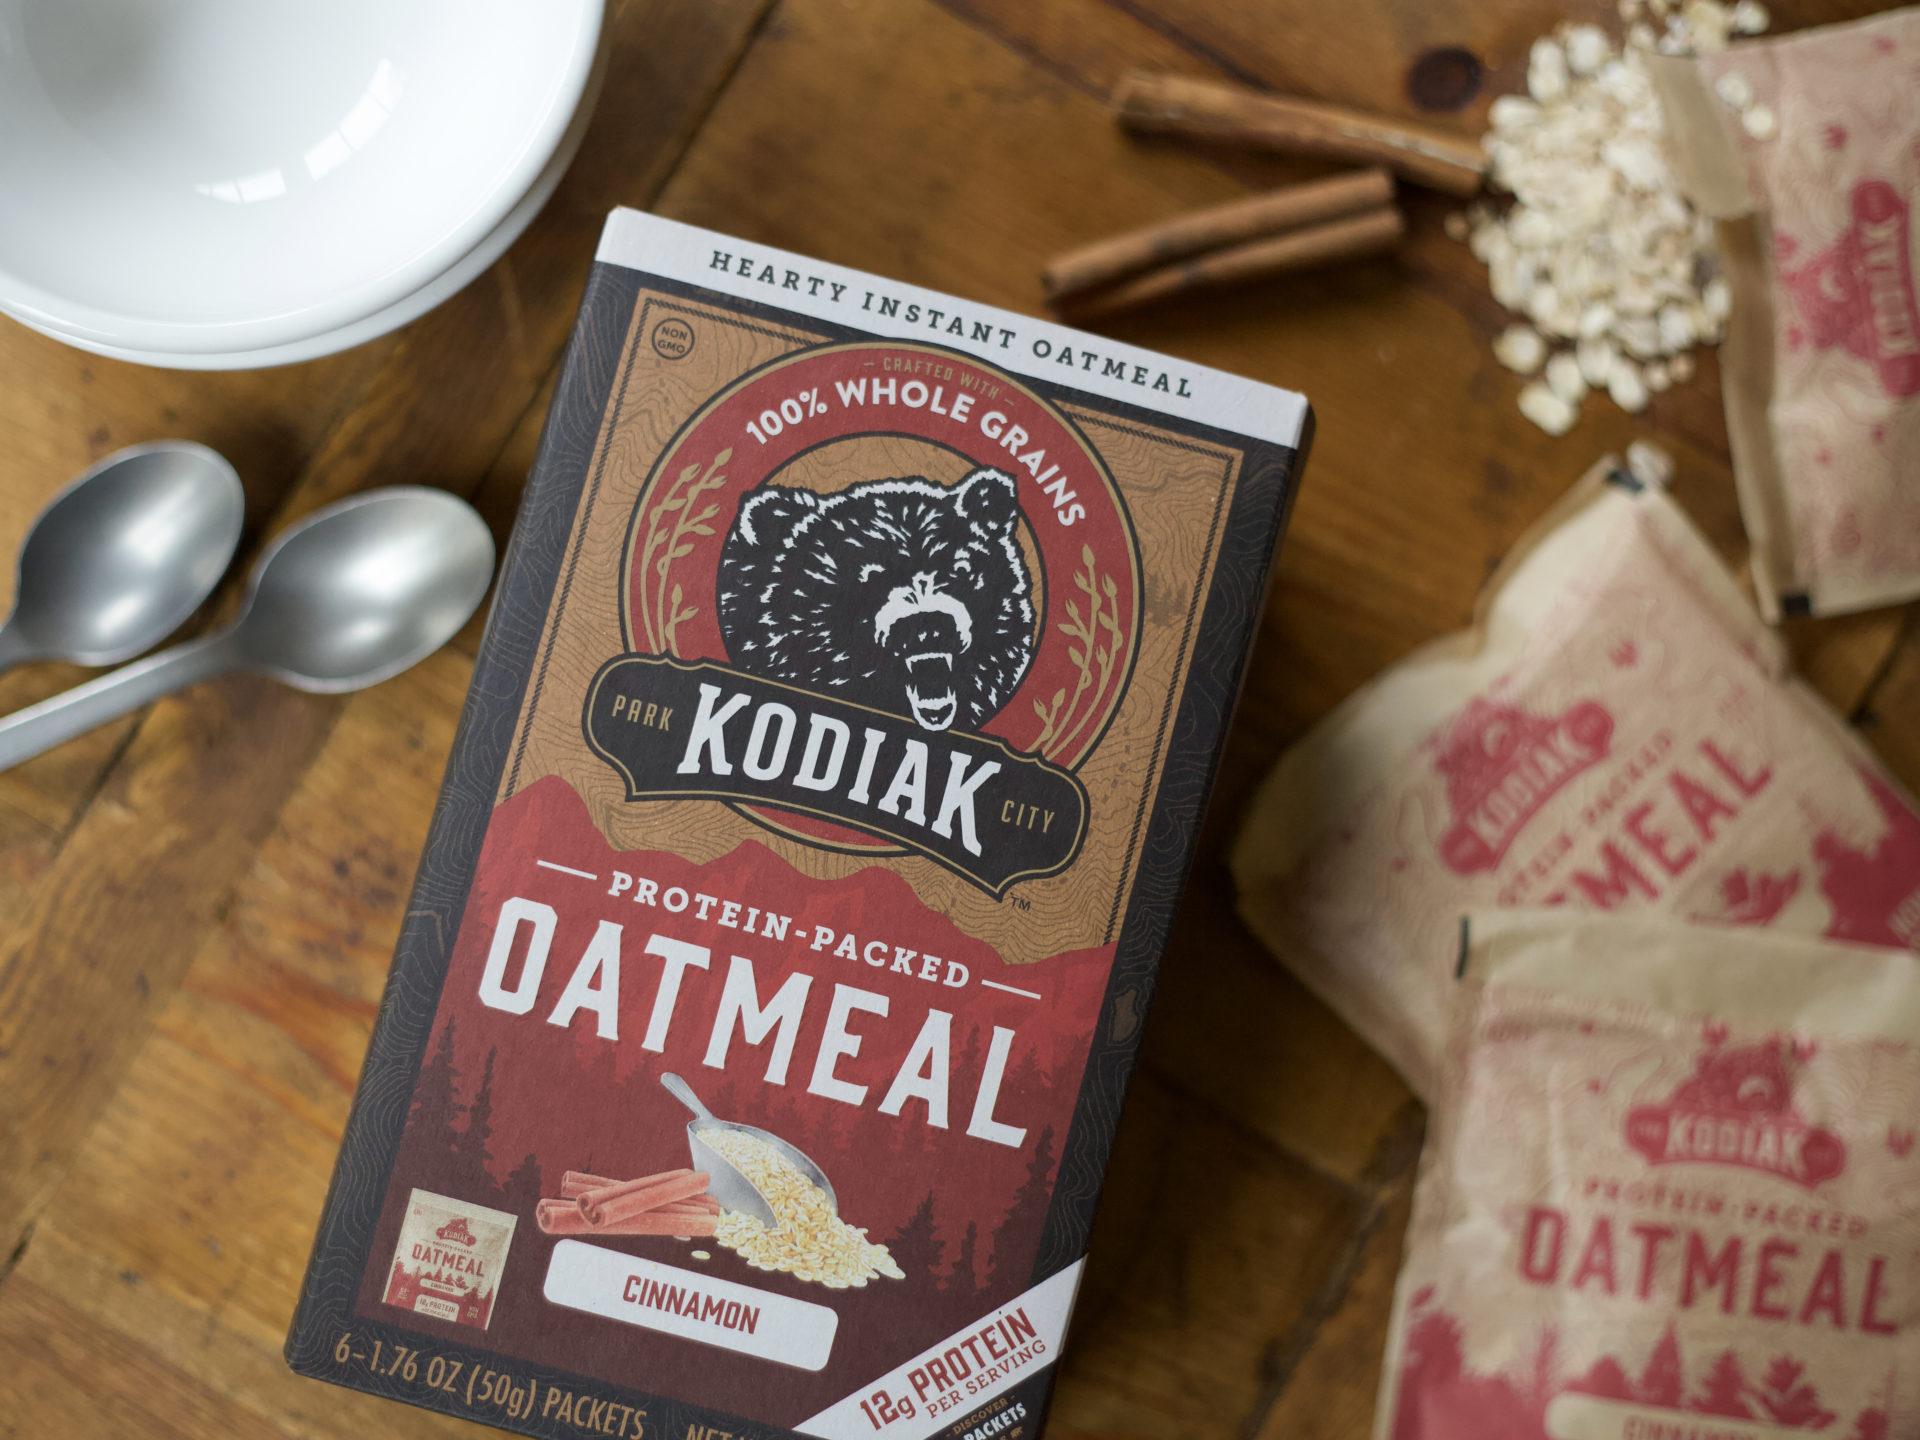 Kodiak Protein-Packed Oatmeal or Power Cakes Flapjack & Waffle Mix As Low As $3.49 At Kroger